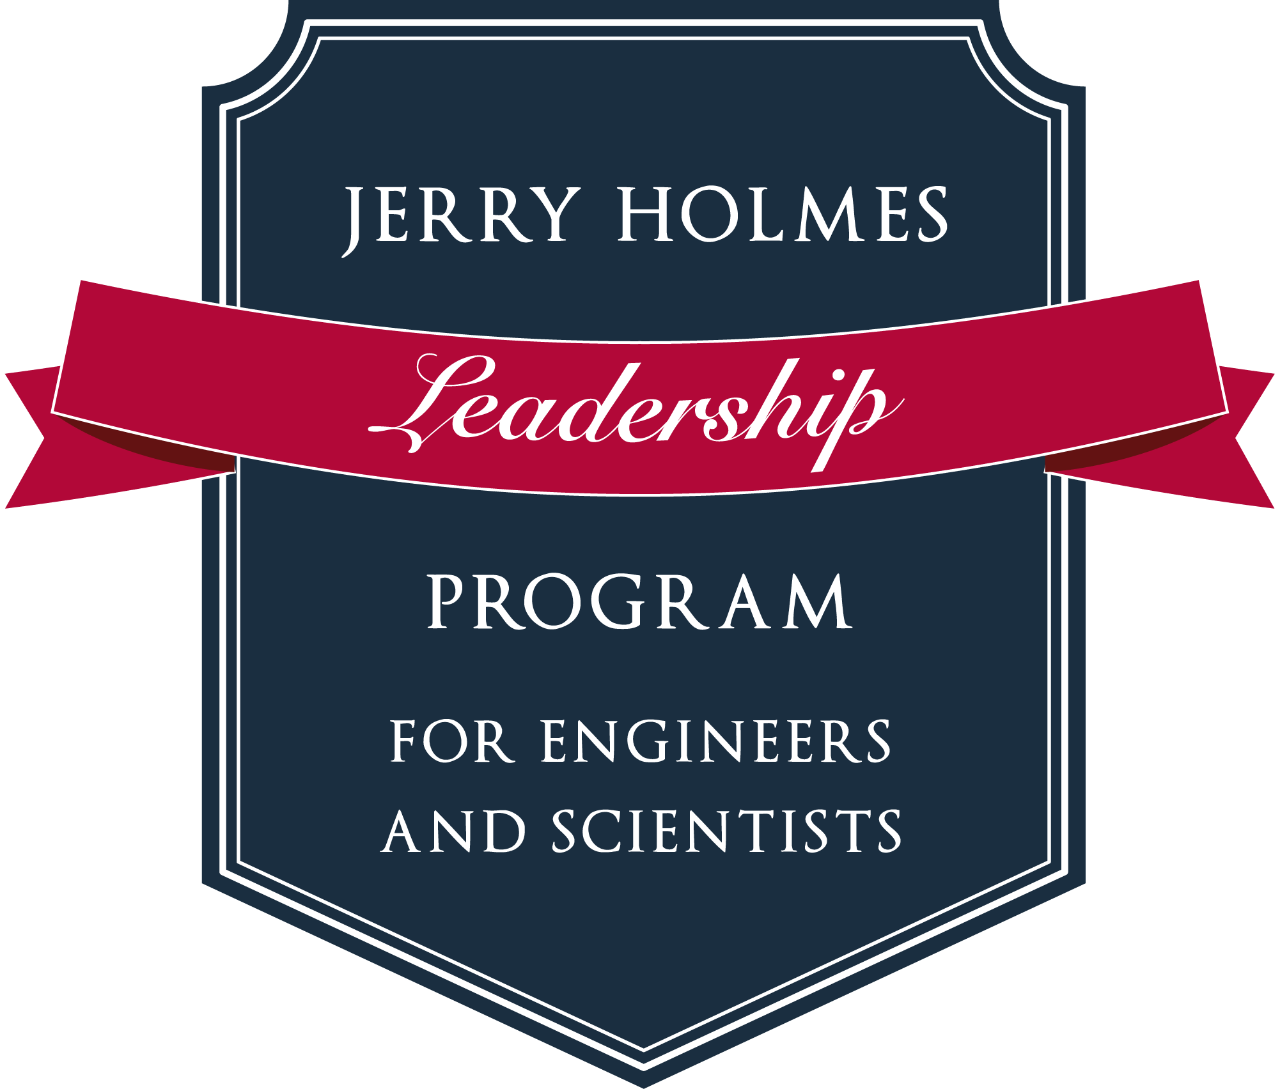 Jerry Holmes Leadership Program for Engineers and Scientists Dark blue and crimson banner logo